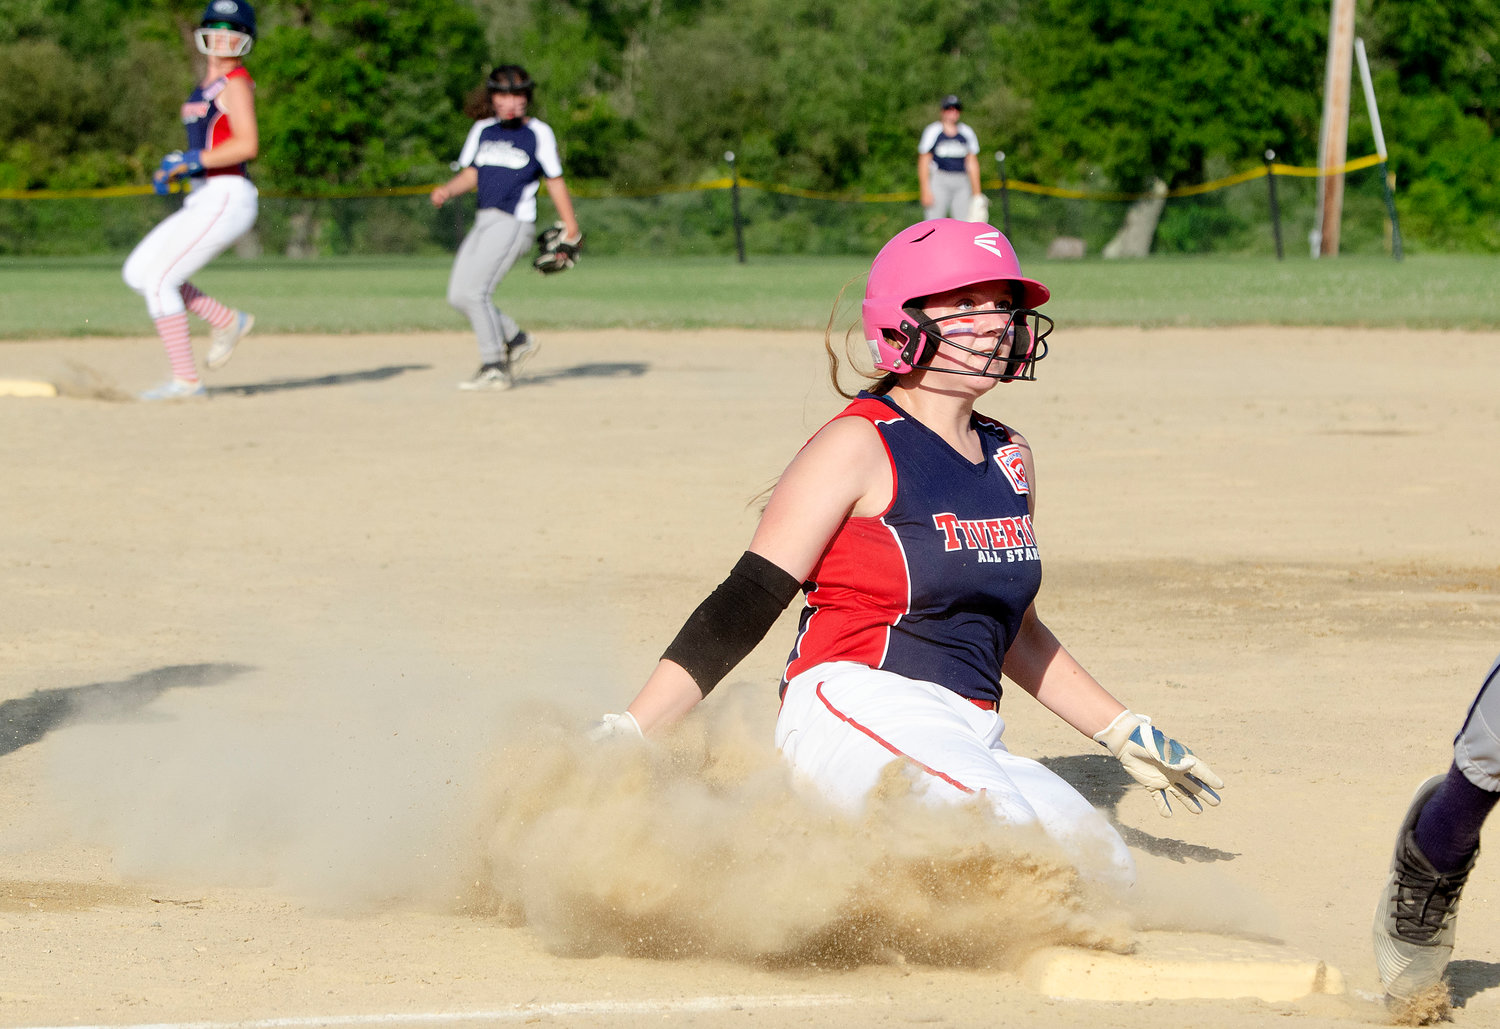 Carlie Martin slides safely into third base during the game.